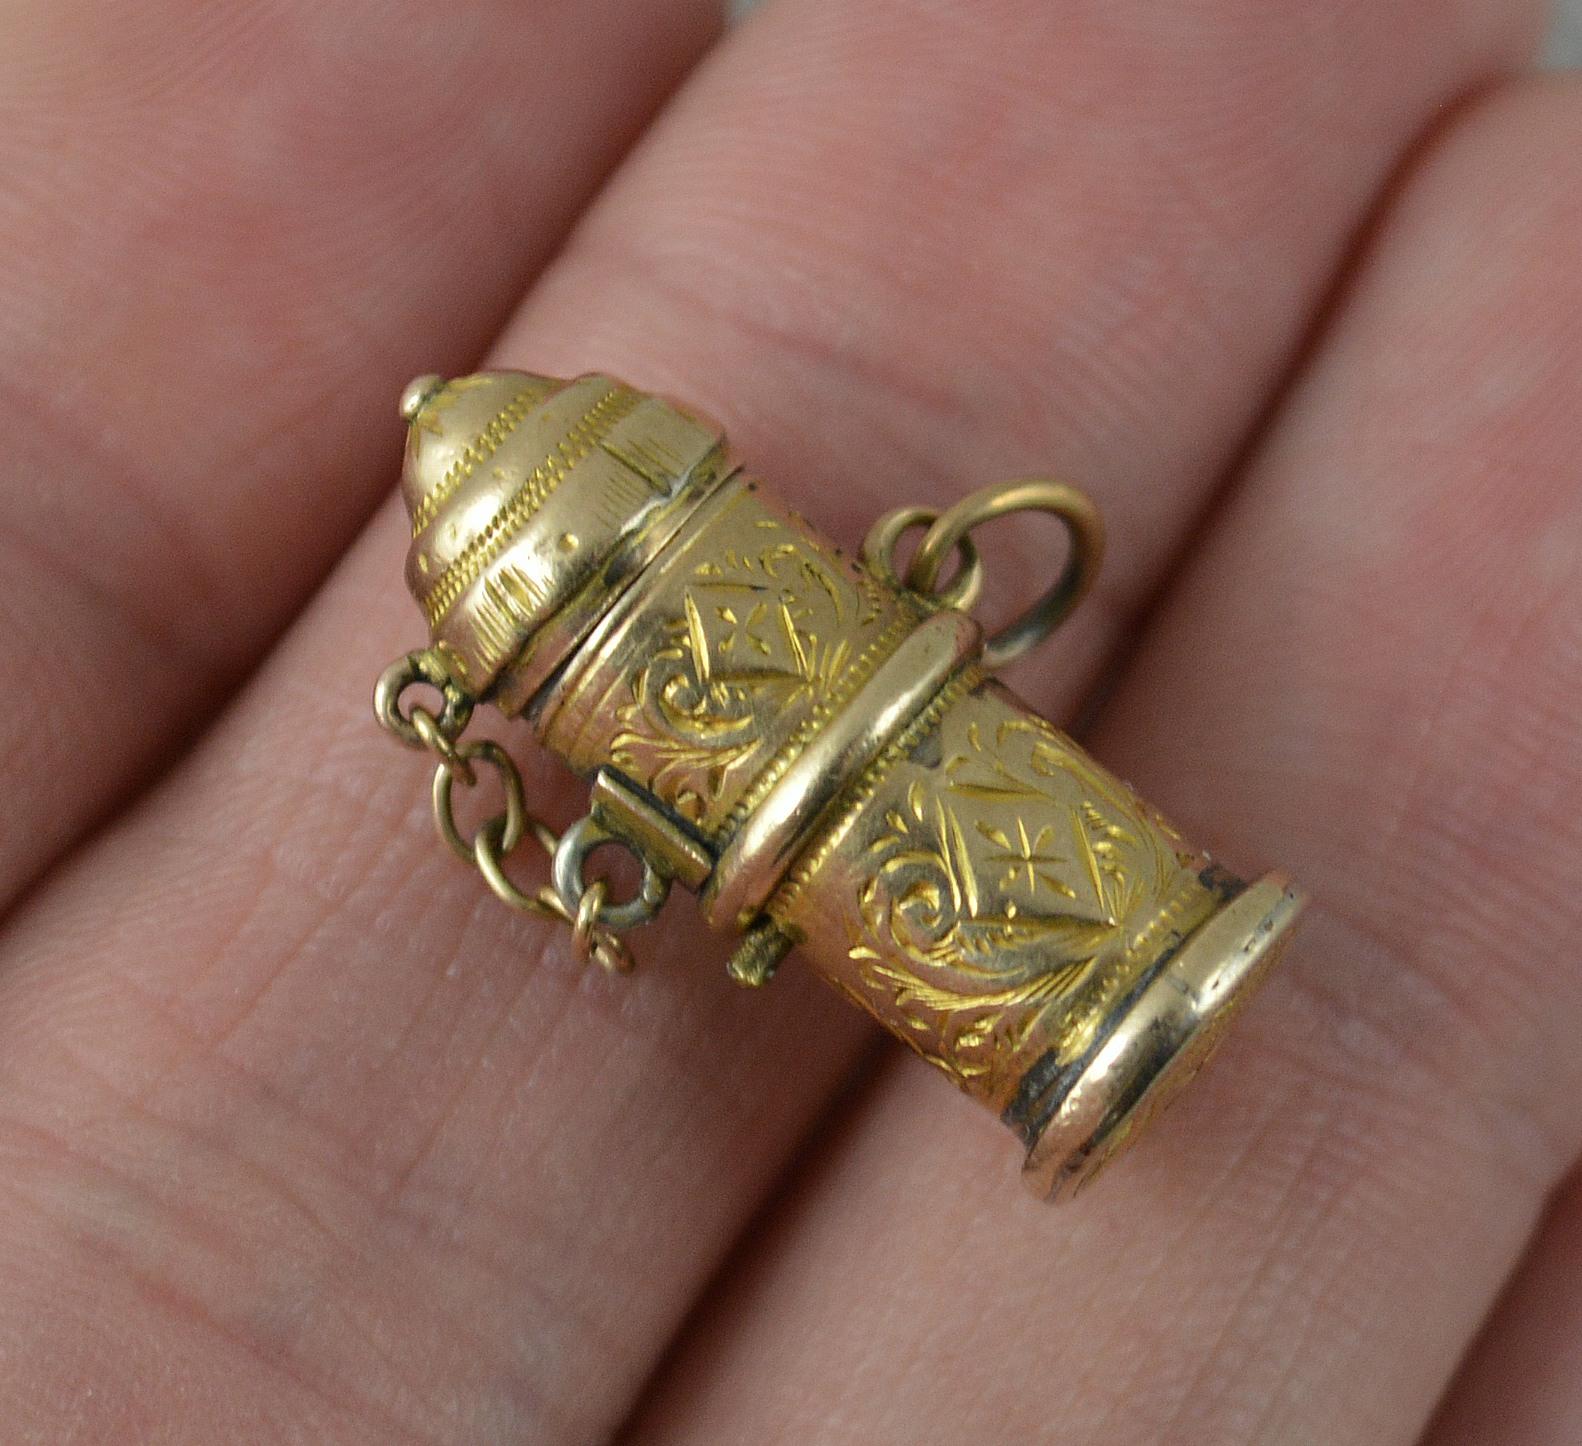 A highly unusual novelty charm pendant.
True Victorian example c1880.
Solid 9 carat yellow gold example with fine engraved design throughout.
The piece with spring insert which pops up to reveal an enamelling devil type creature.

CONDITION ; Very